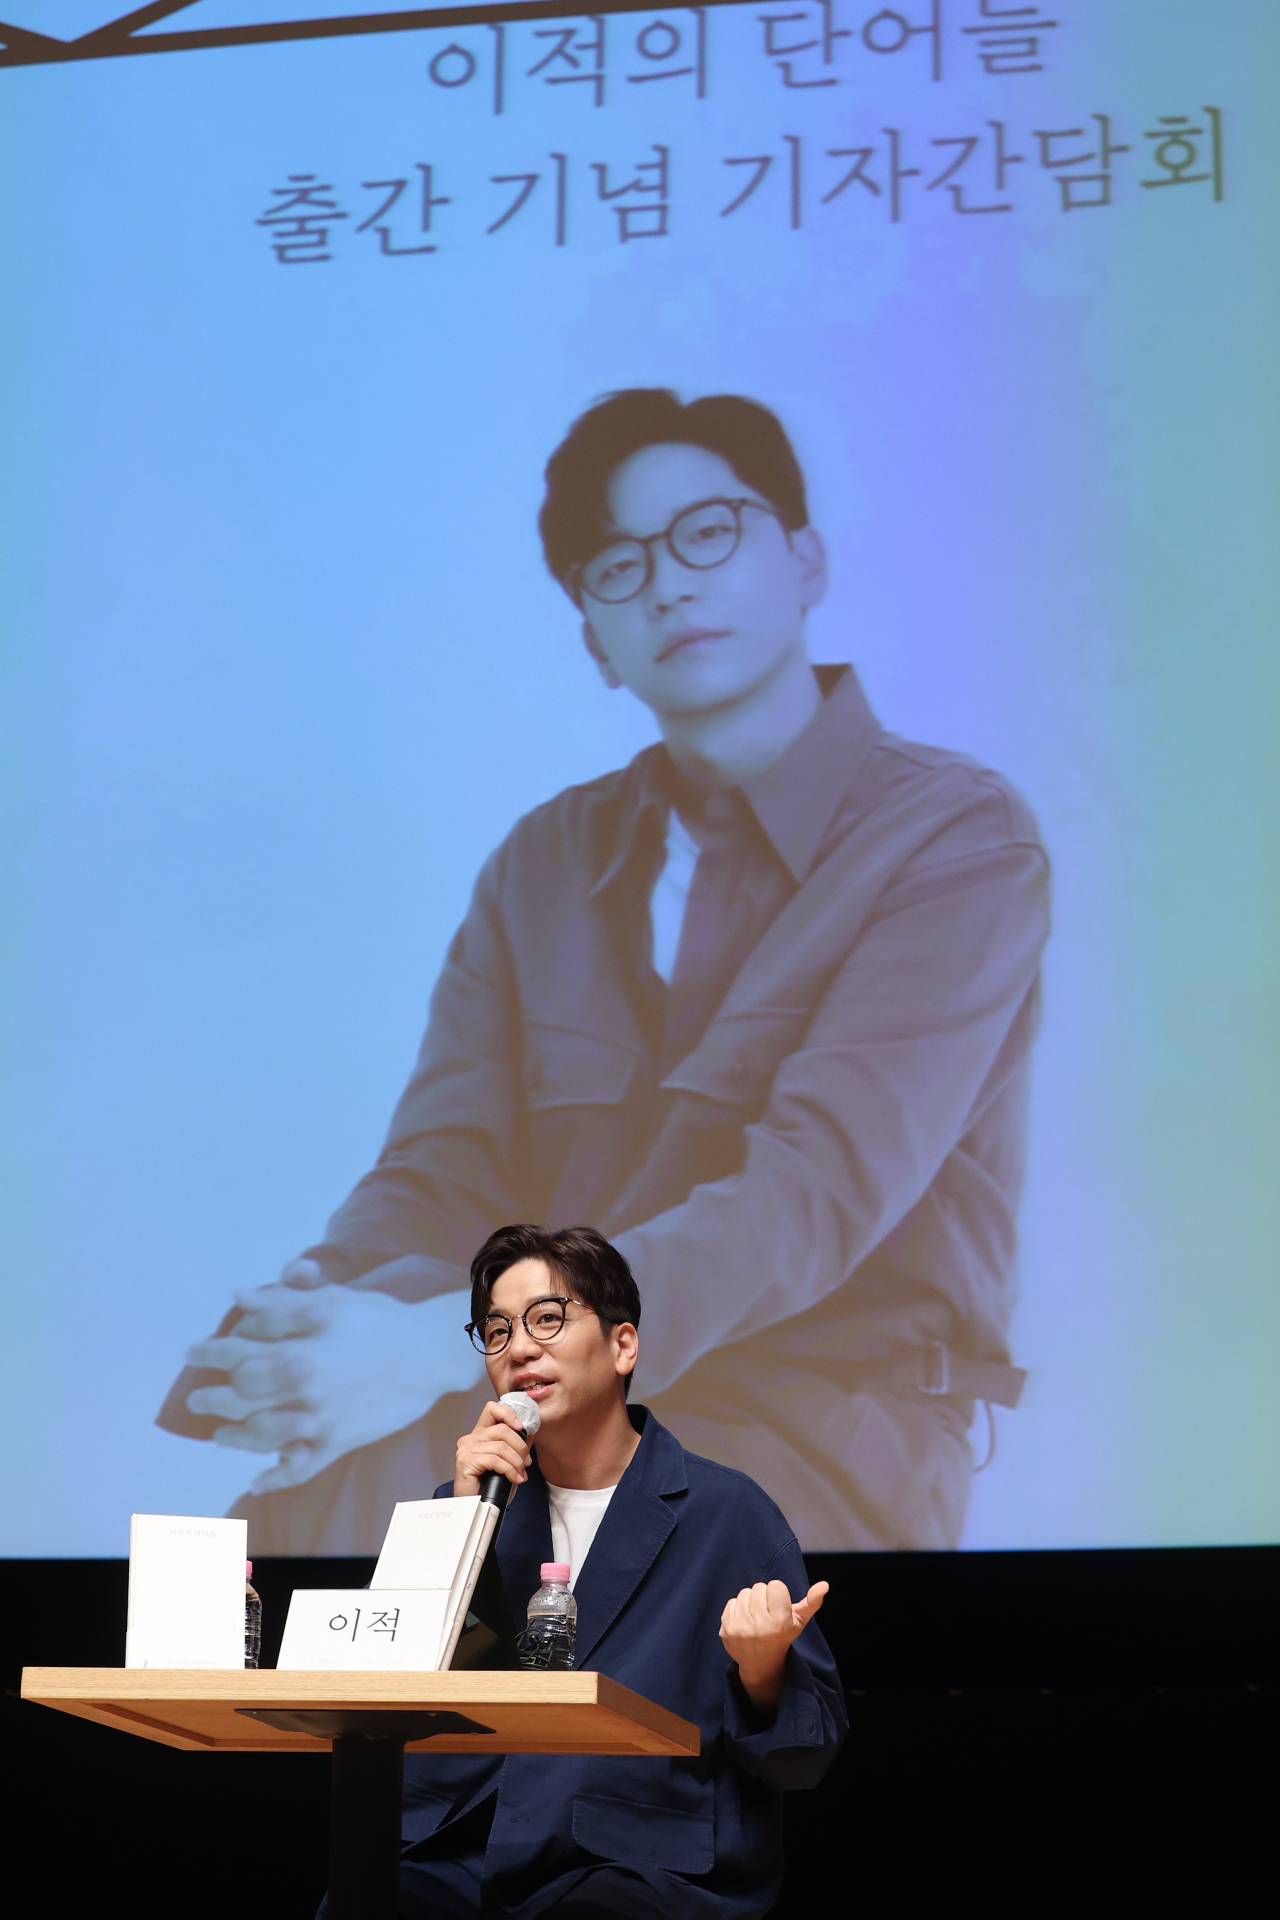 Lee Juck speaks at a press conference held in Jung-gu, Seoul, on May 31. (Gimm-Young Publishers)